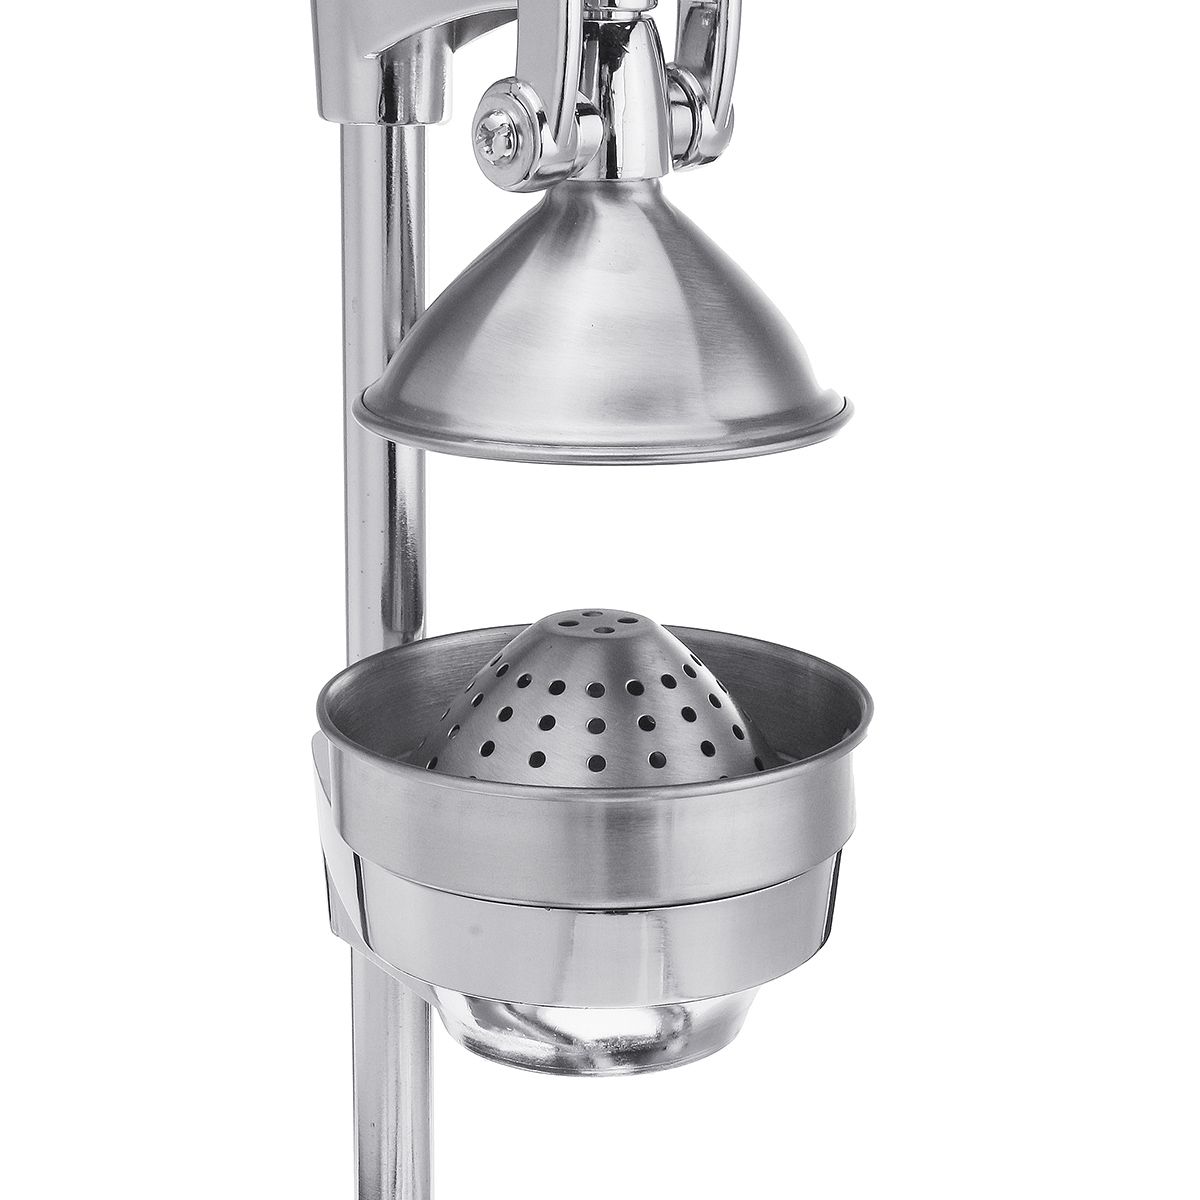 Stainless-Steel-Manual-Hand-Press-Juicer-Squeezer-Citrus-Pomegranate-Fruit-Juice-Extractor-Commercia-1536619